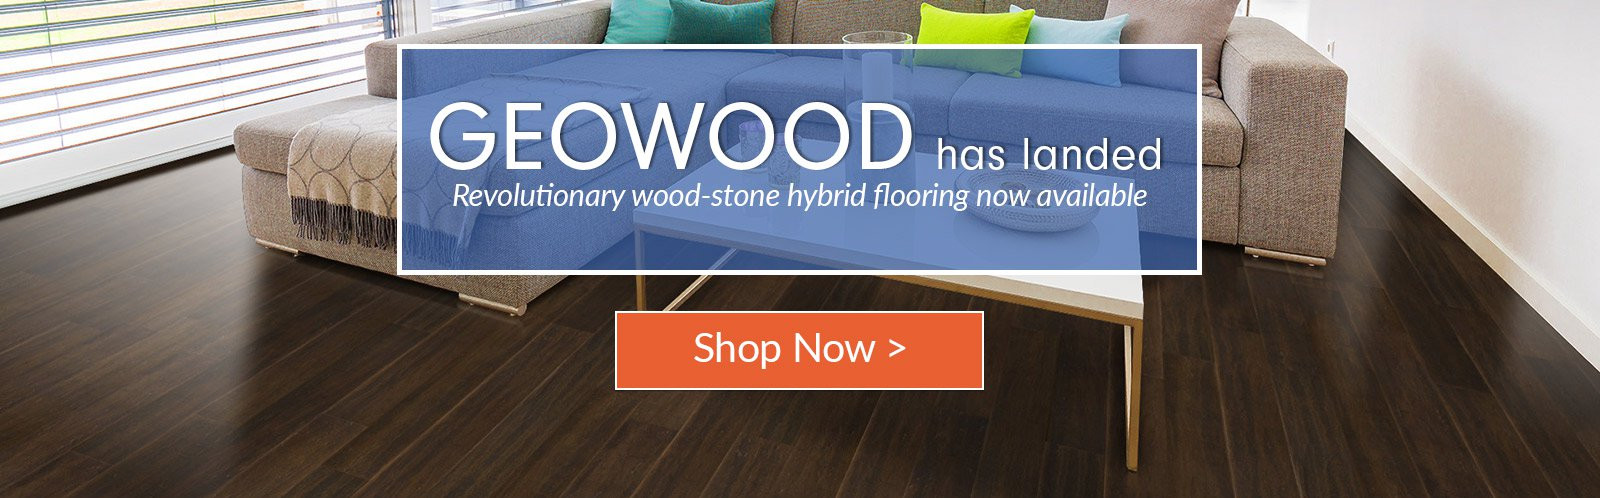 16 Stylish Hardwood Flooring Suppliers Denver Co 2024 free download hardwood flooring suppliers denver co of green building construction materials and home decor cali bamboo intended for geowood launch homepage slider